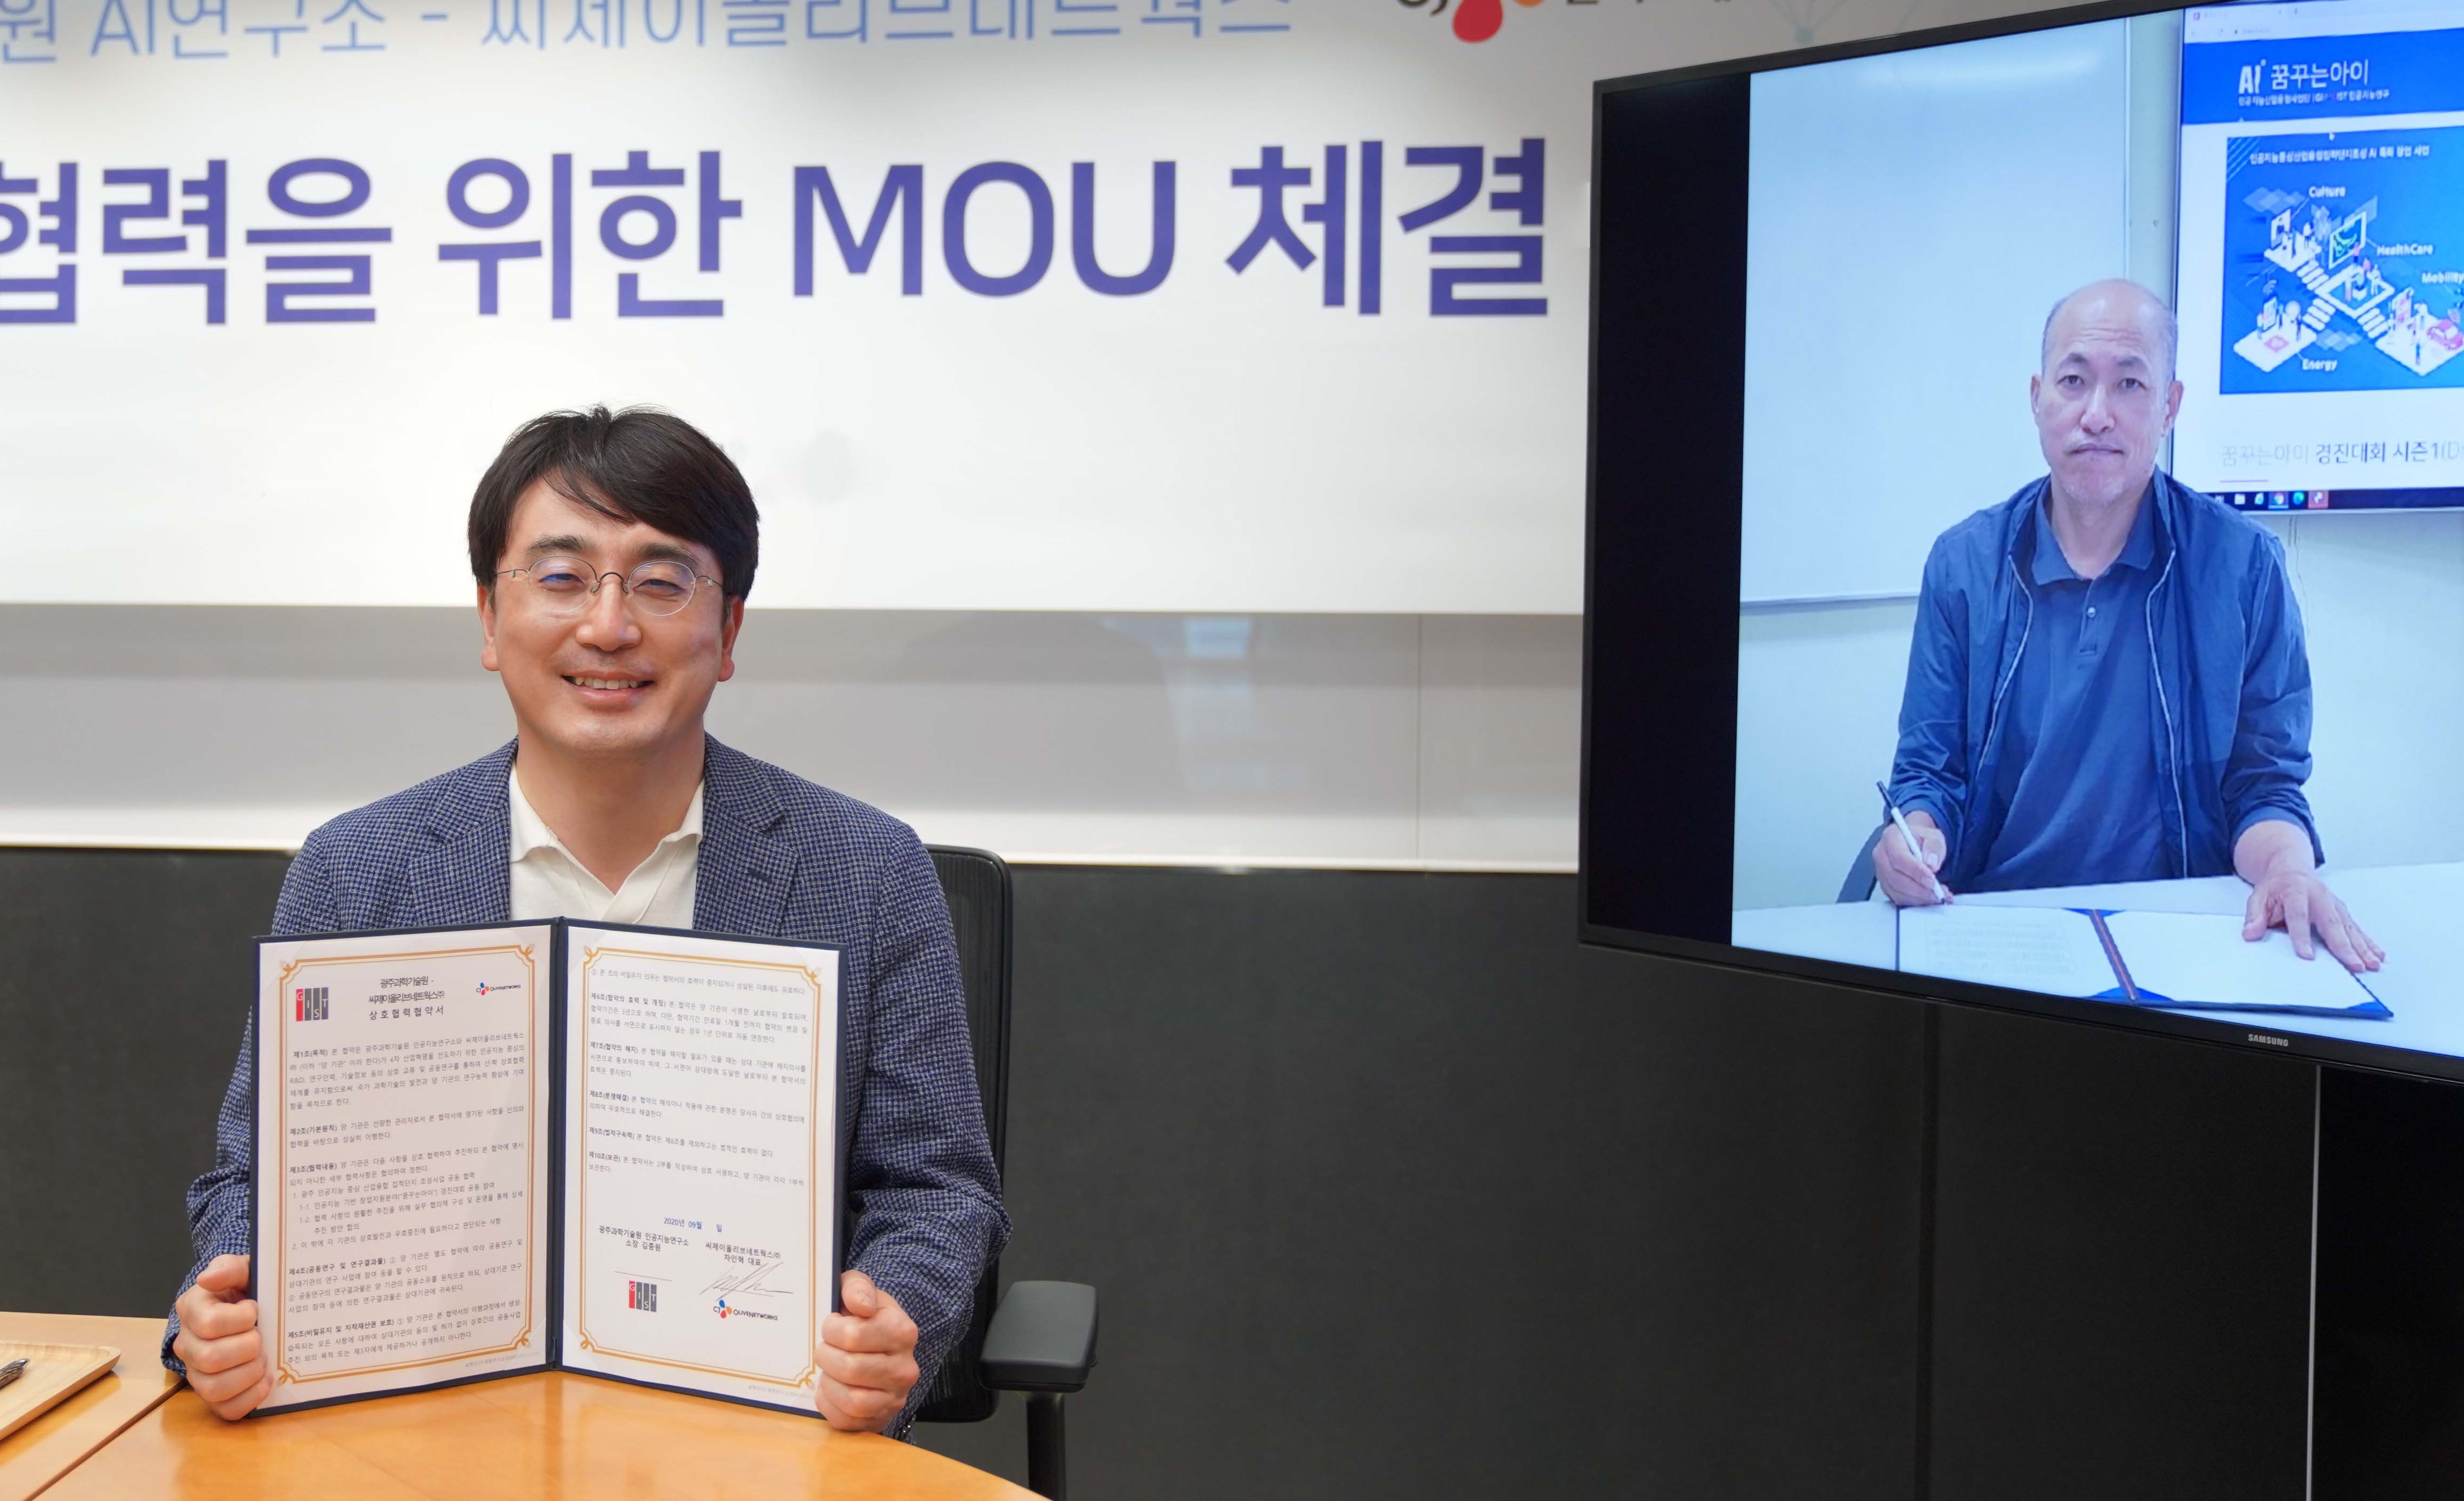 GIST and CJ Olive Networks signs MoU for industry-academic cooperation in AI 이미지